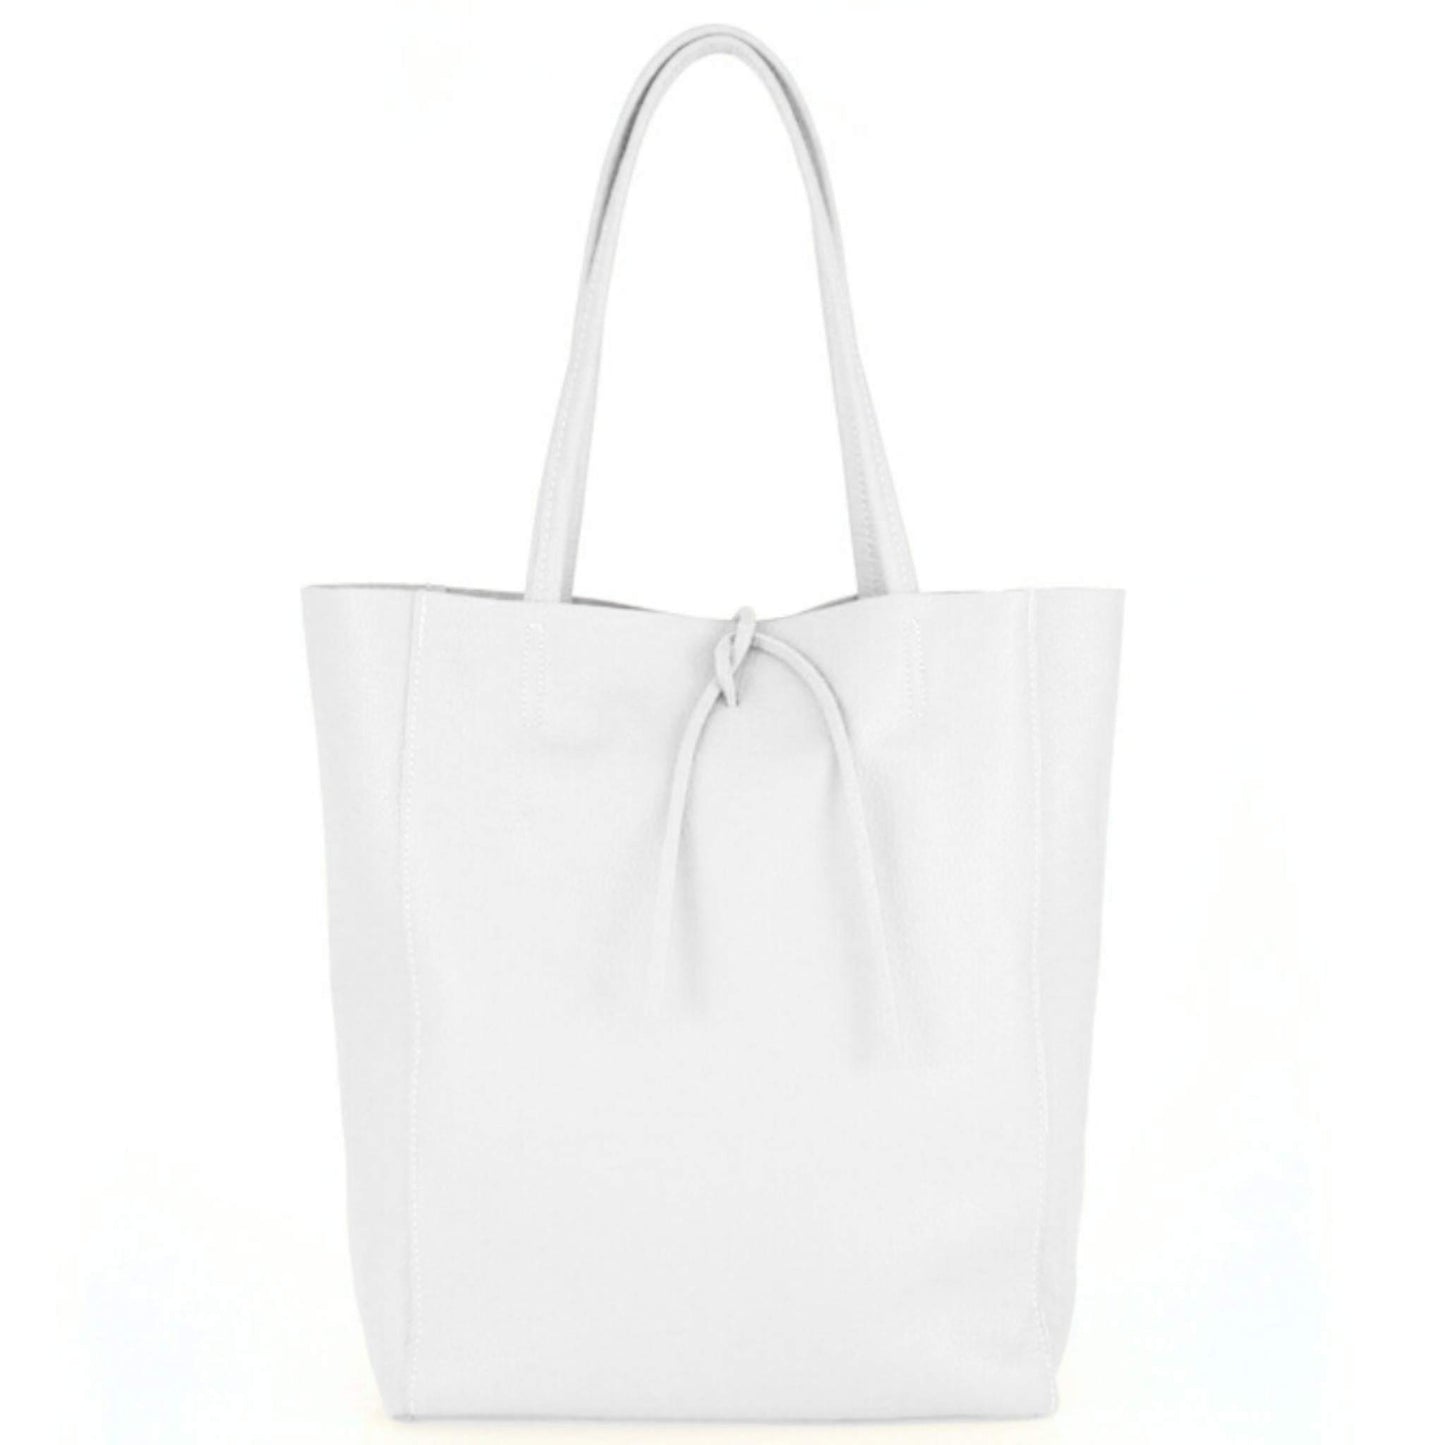 The Leather Shopper Bag